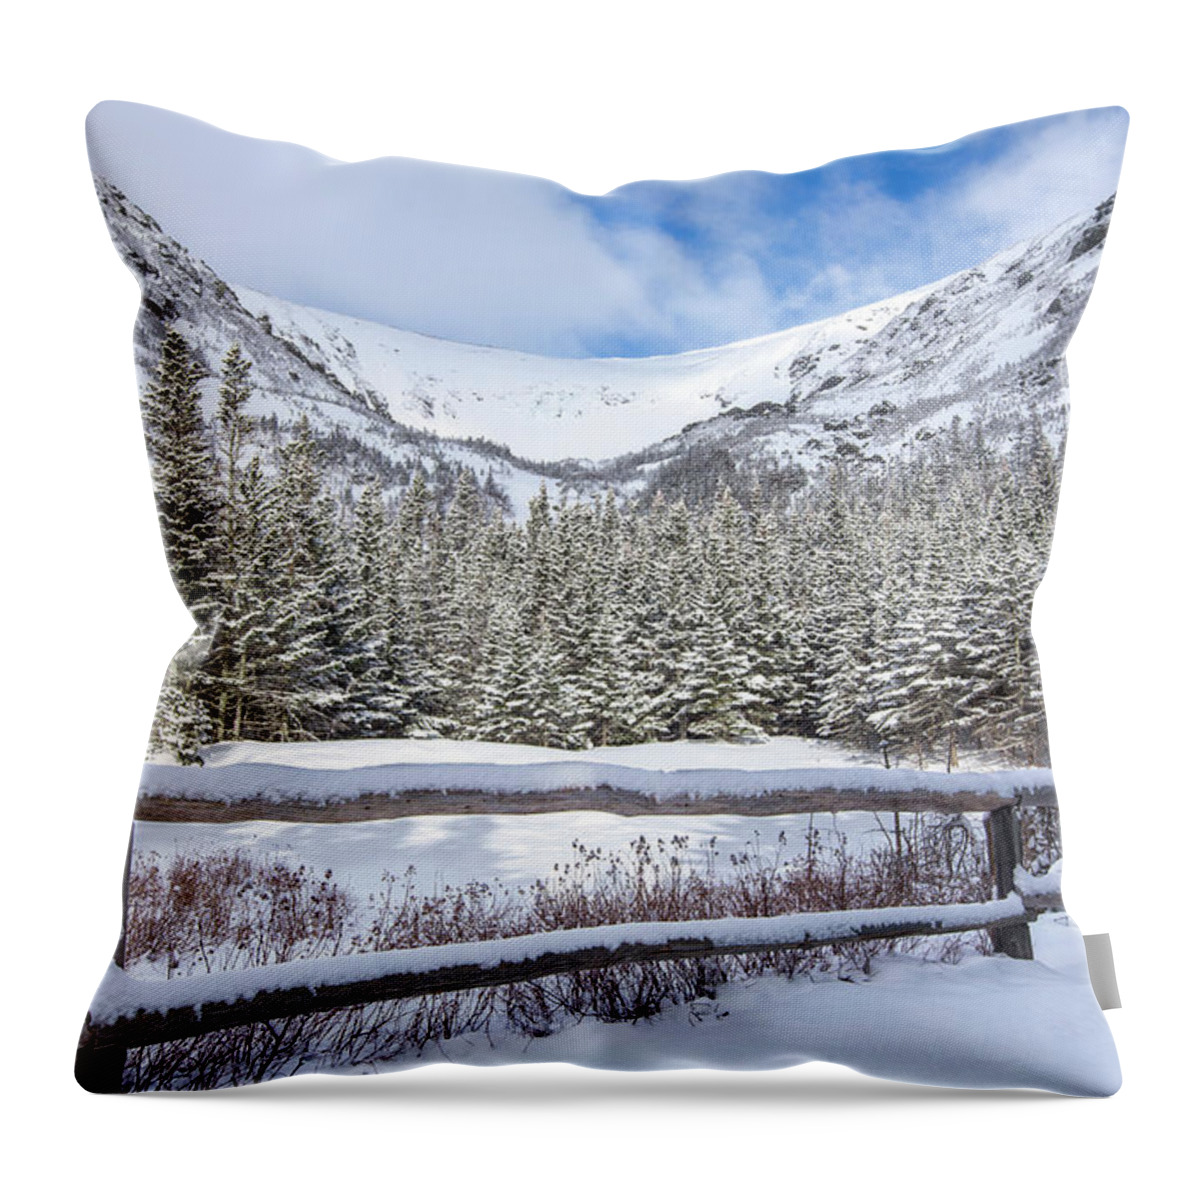 Tuckerman Throw Pillow featuring the photograph Tuckerman Ravine Winter Fence by White Mountain Images